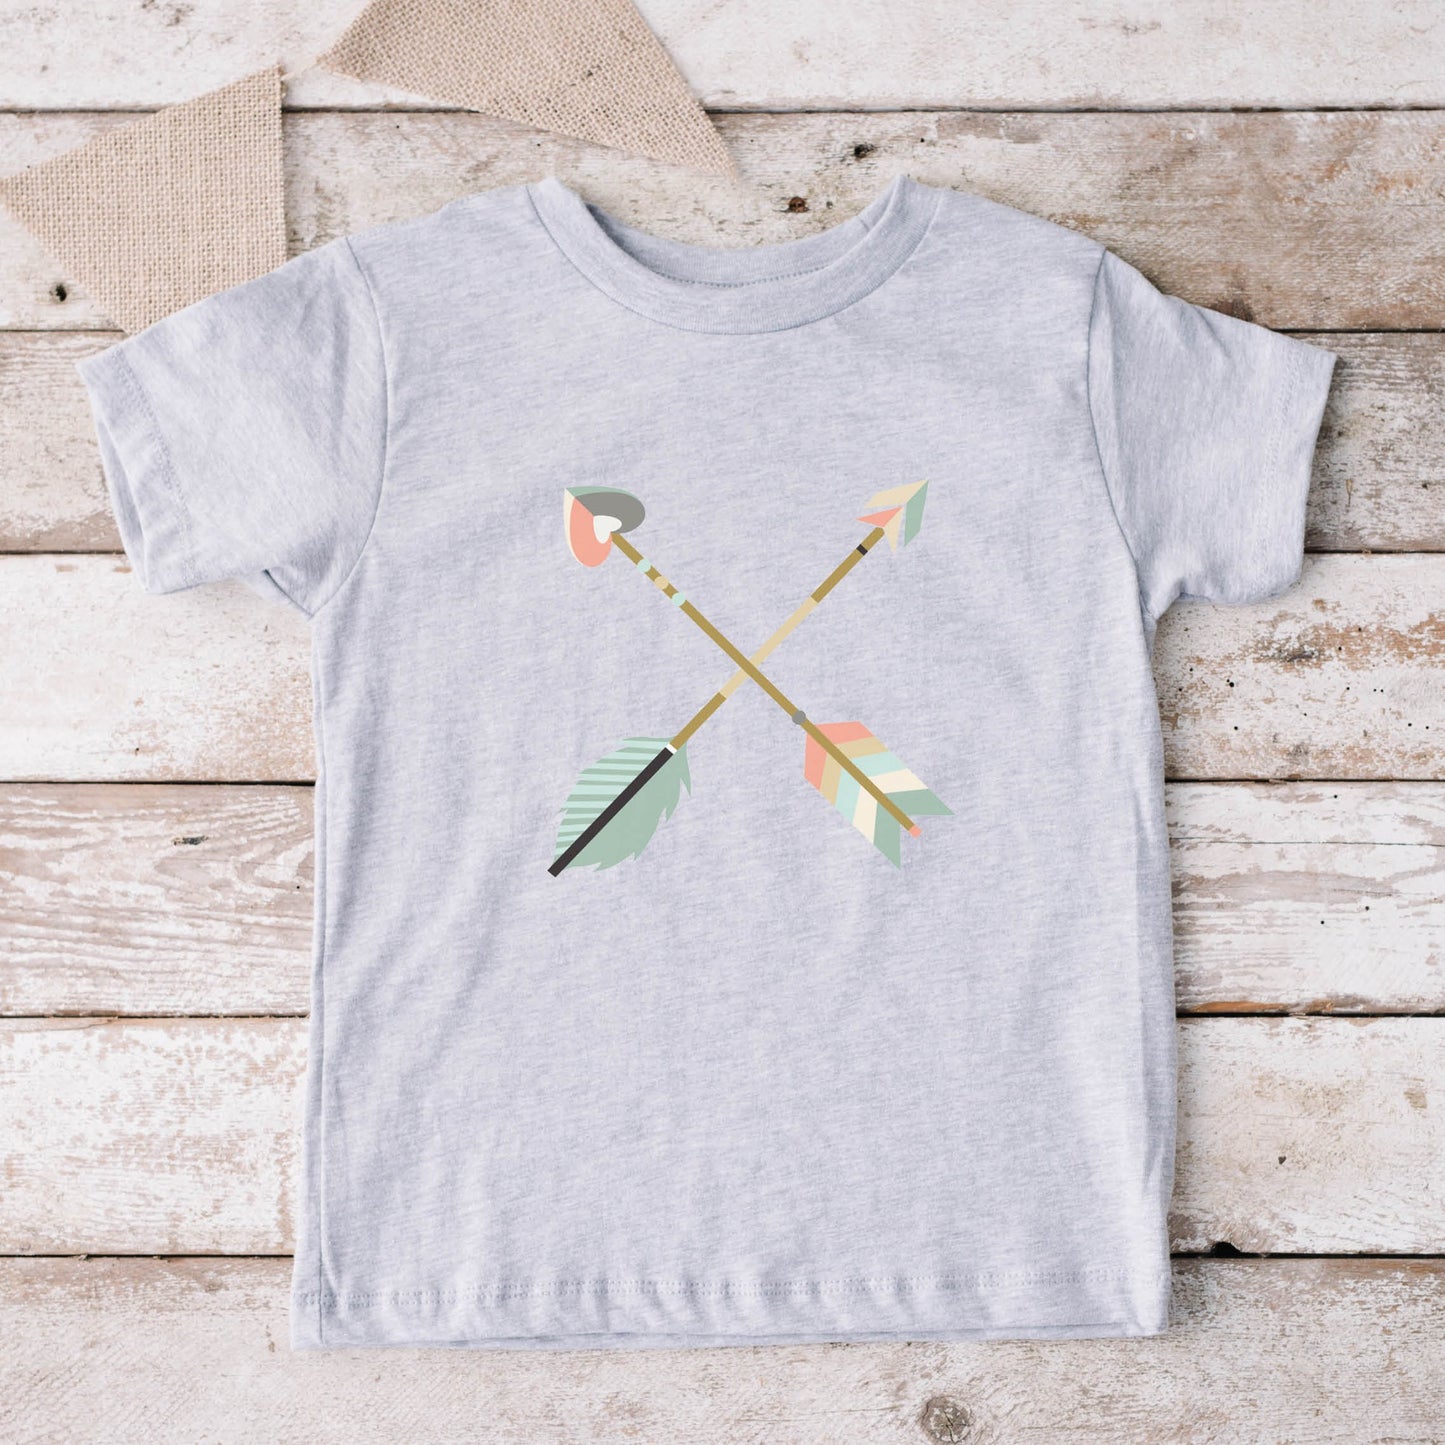 Heather gray toddler size t-shirt with pastel criss-cross boho arrows, one with a heart on the end, to match Christian mom's womens' "Raising Arrows" Psalm 127:4-5 bible verse t-shirt for boys and girls